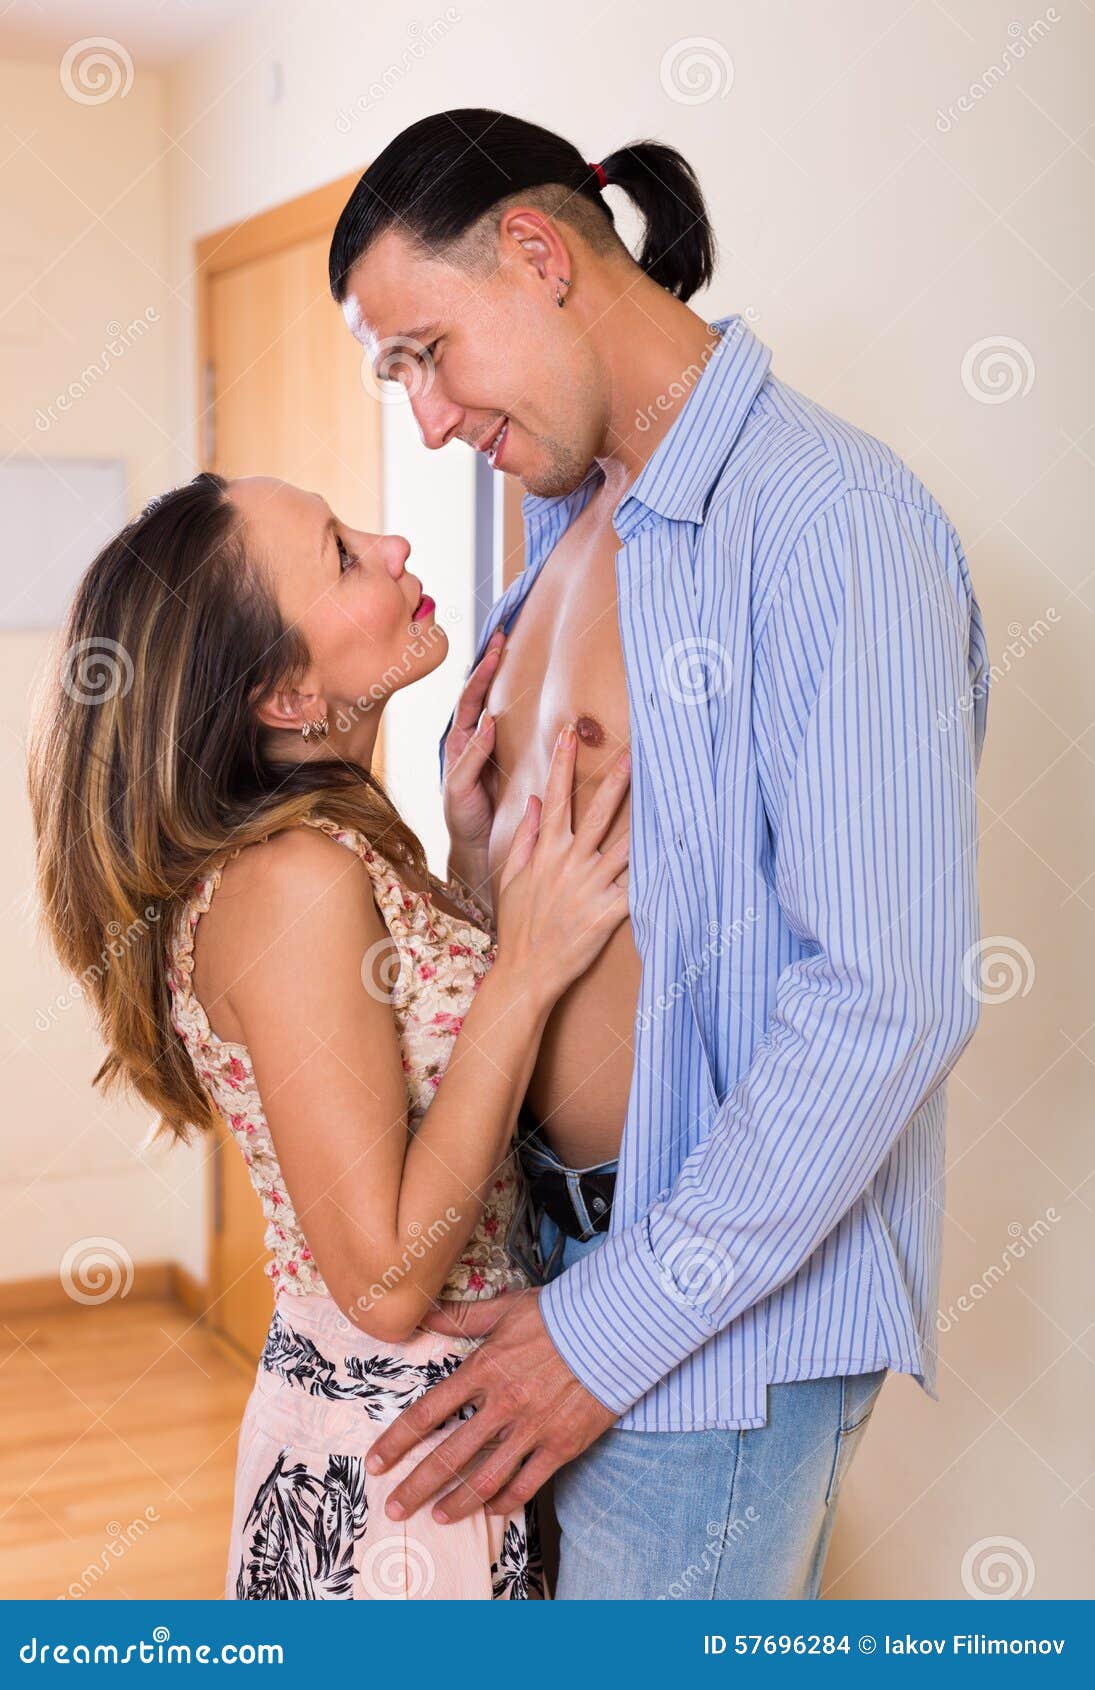 Adult Couple Having Sex at Home Stock Photo